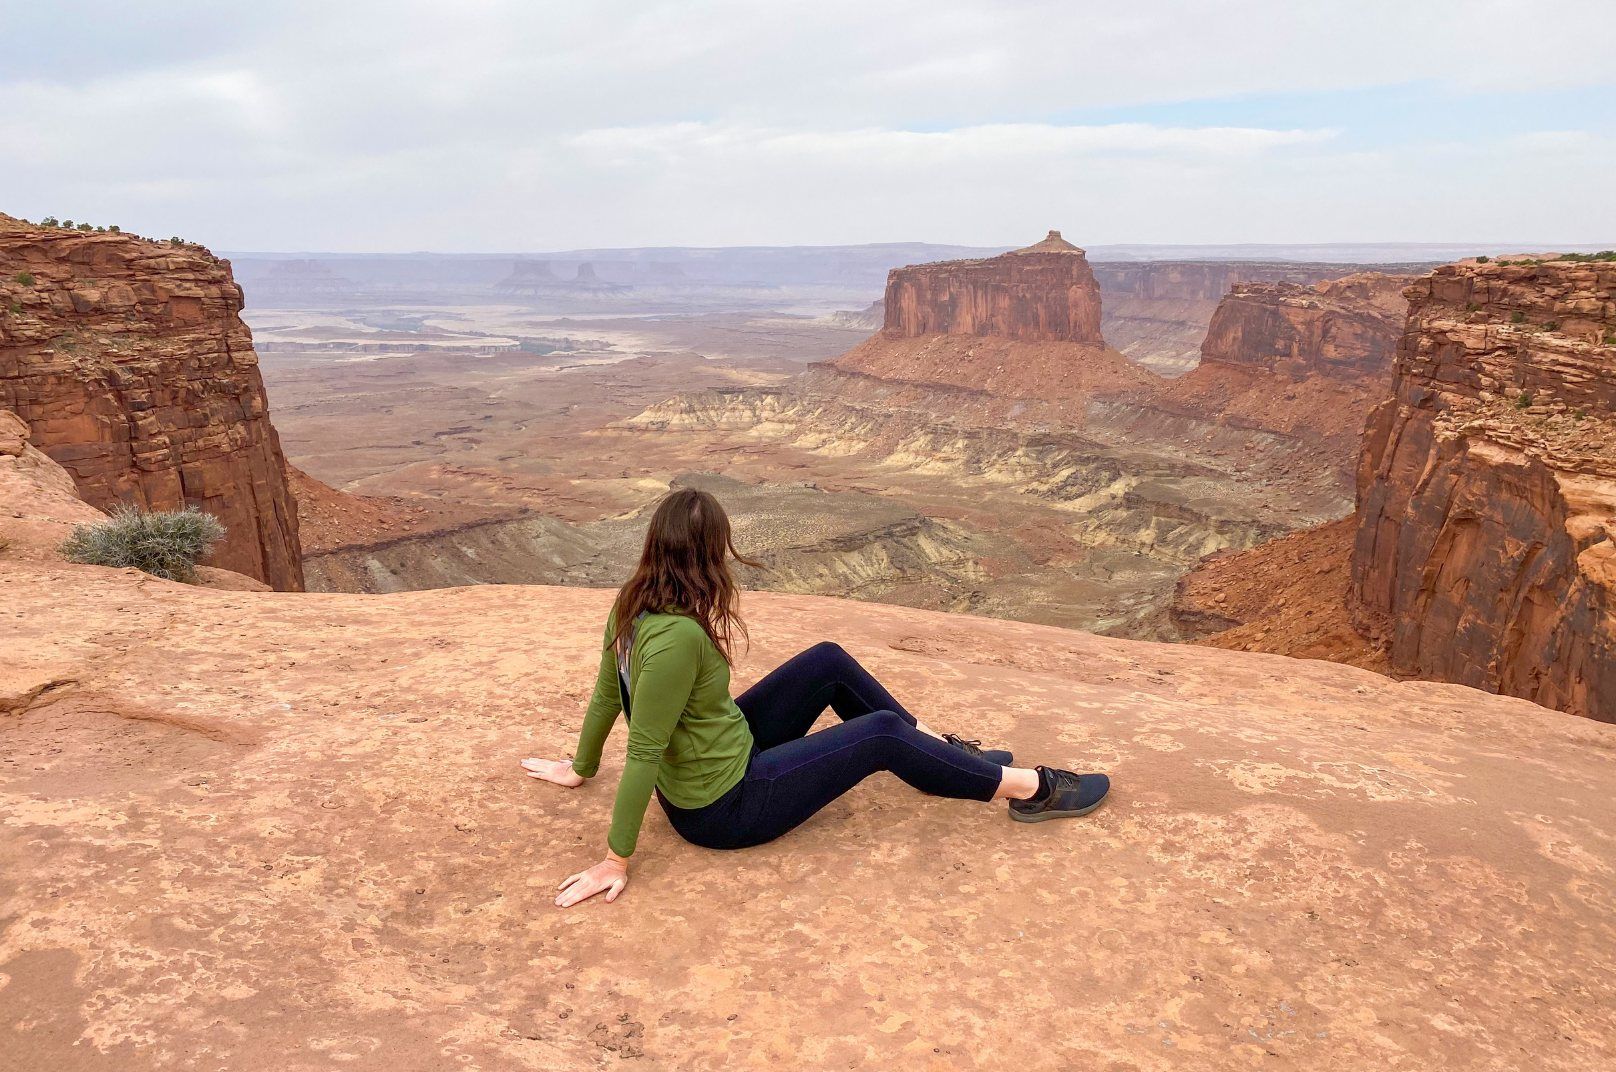 One day in Canyonlands National Park